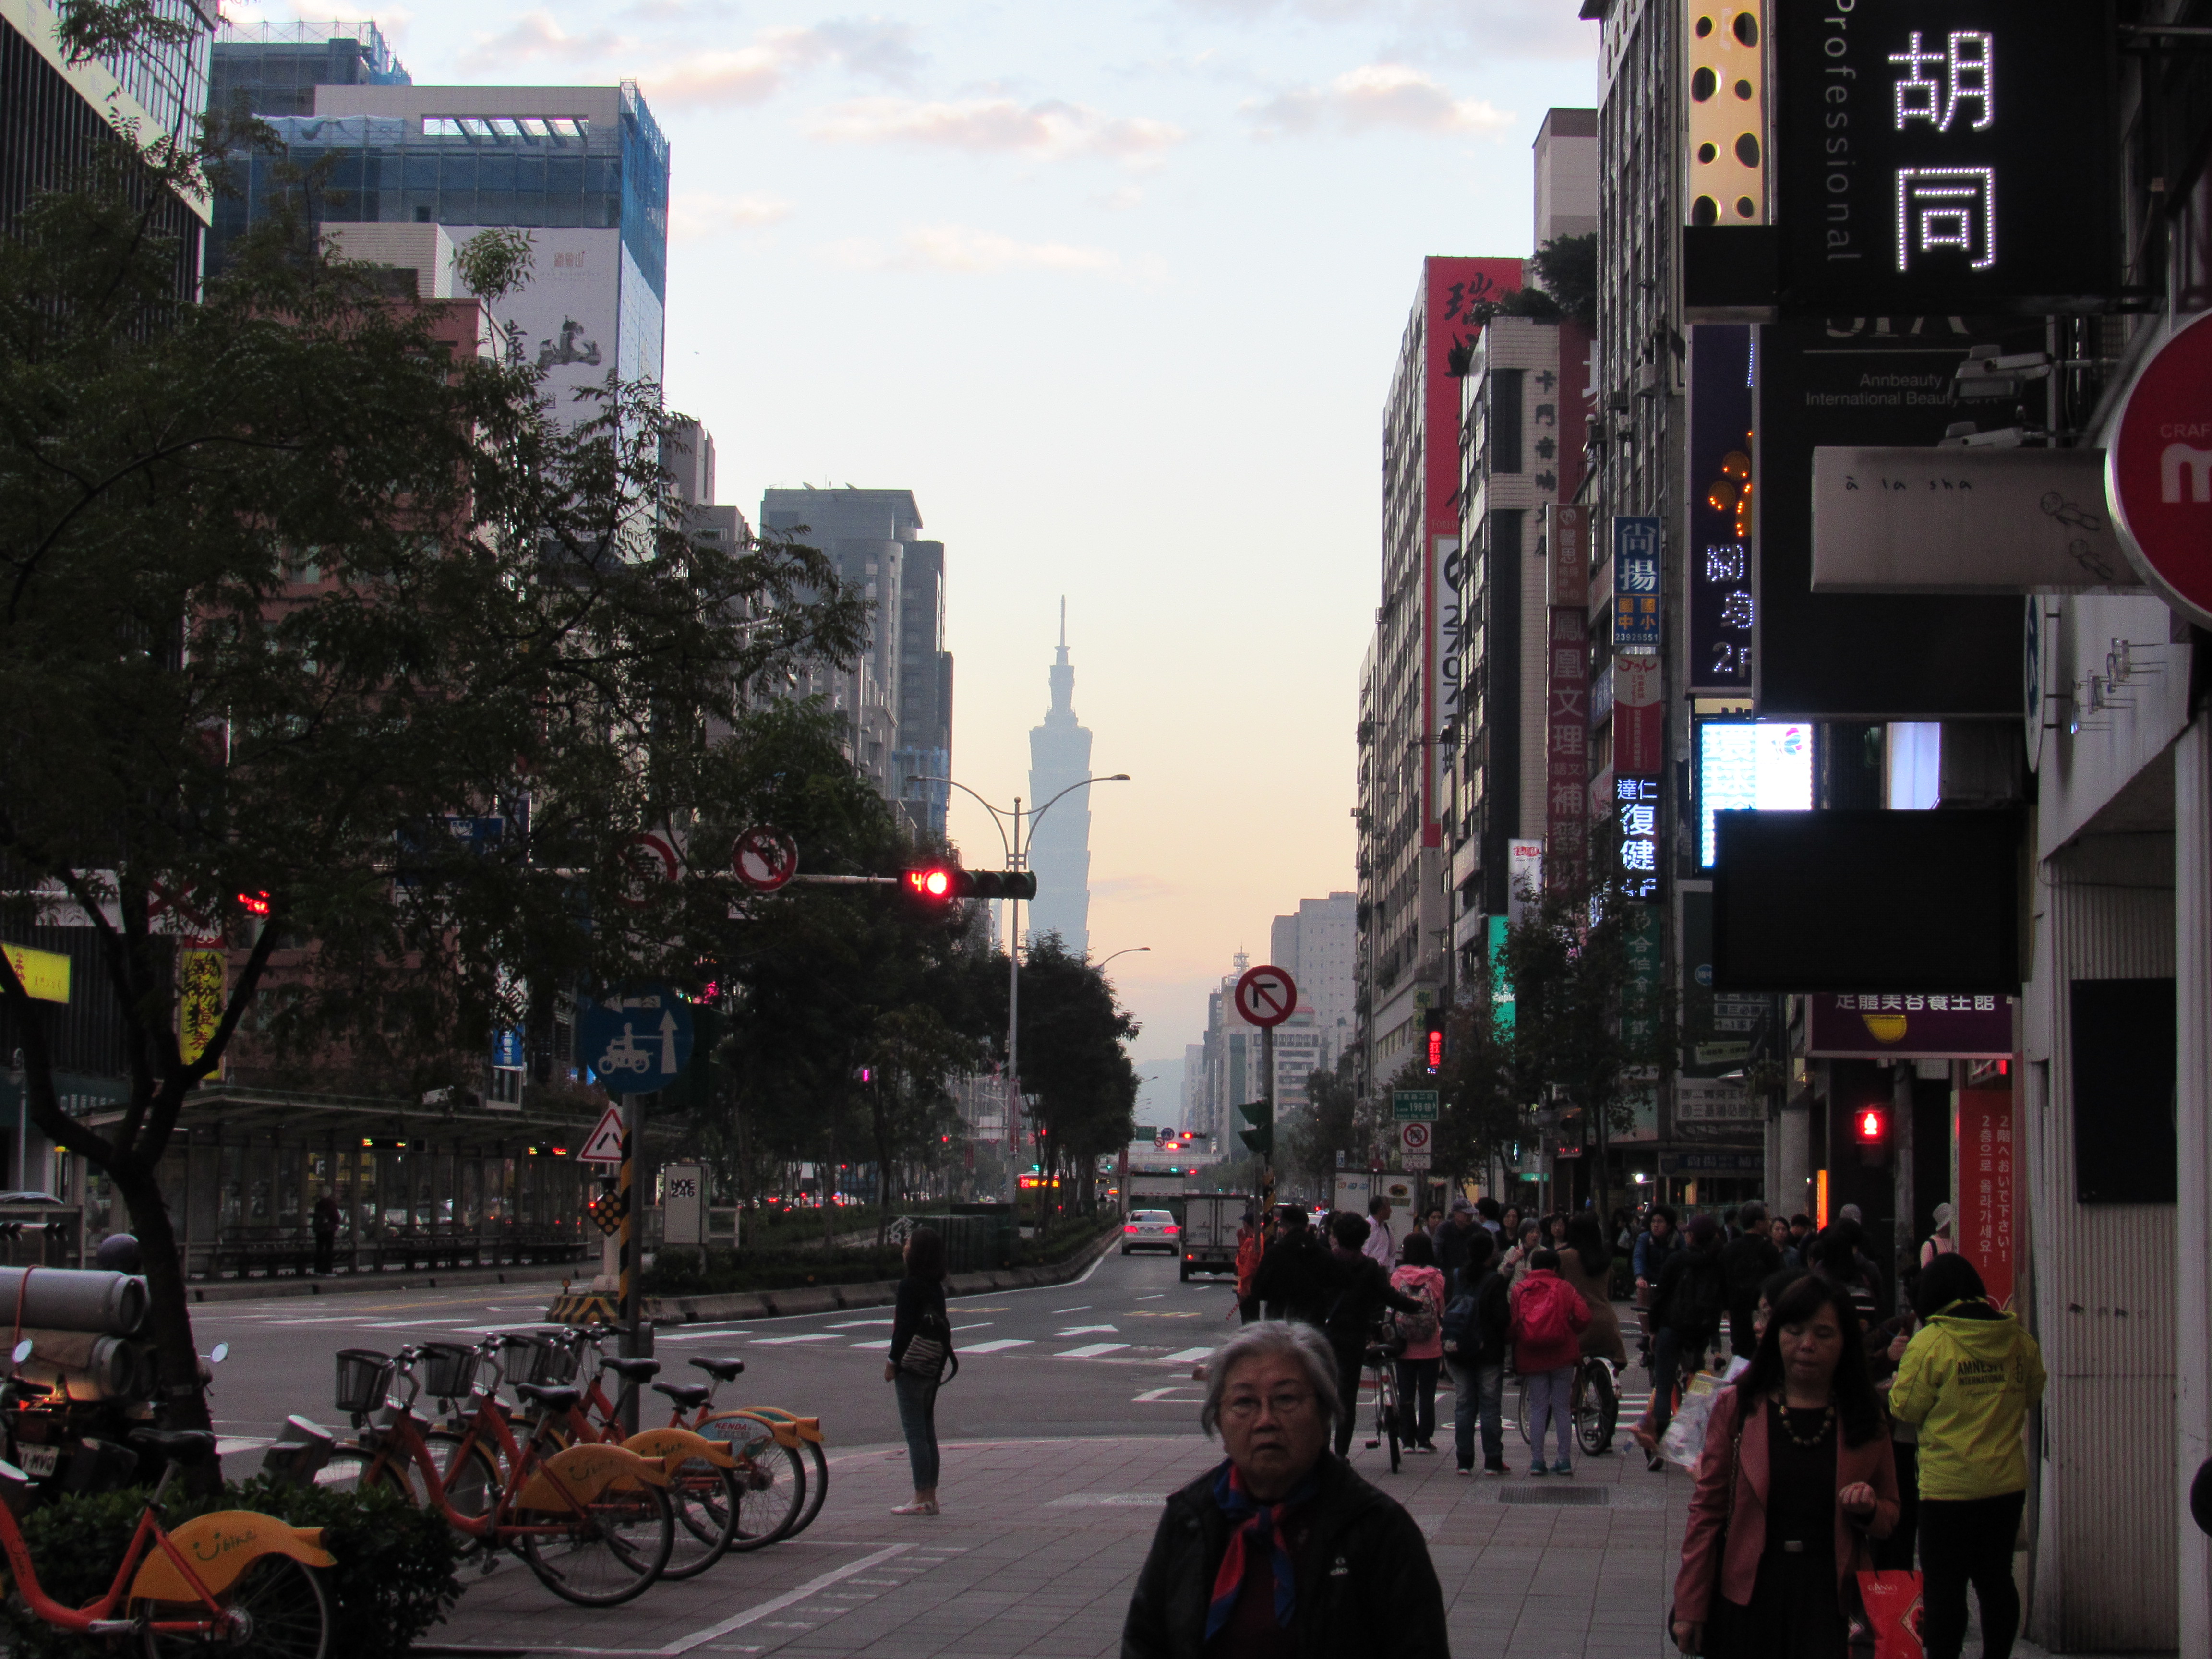 The streets of Taipei at dusk, with Taipei 101 visible in the distance.